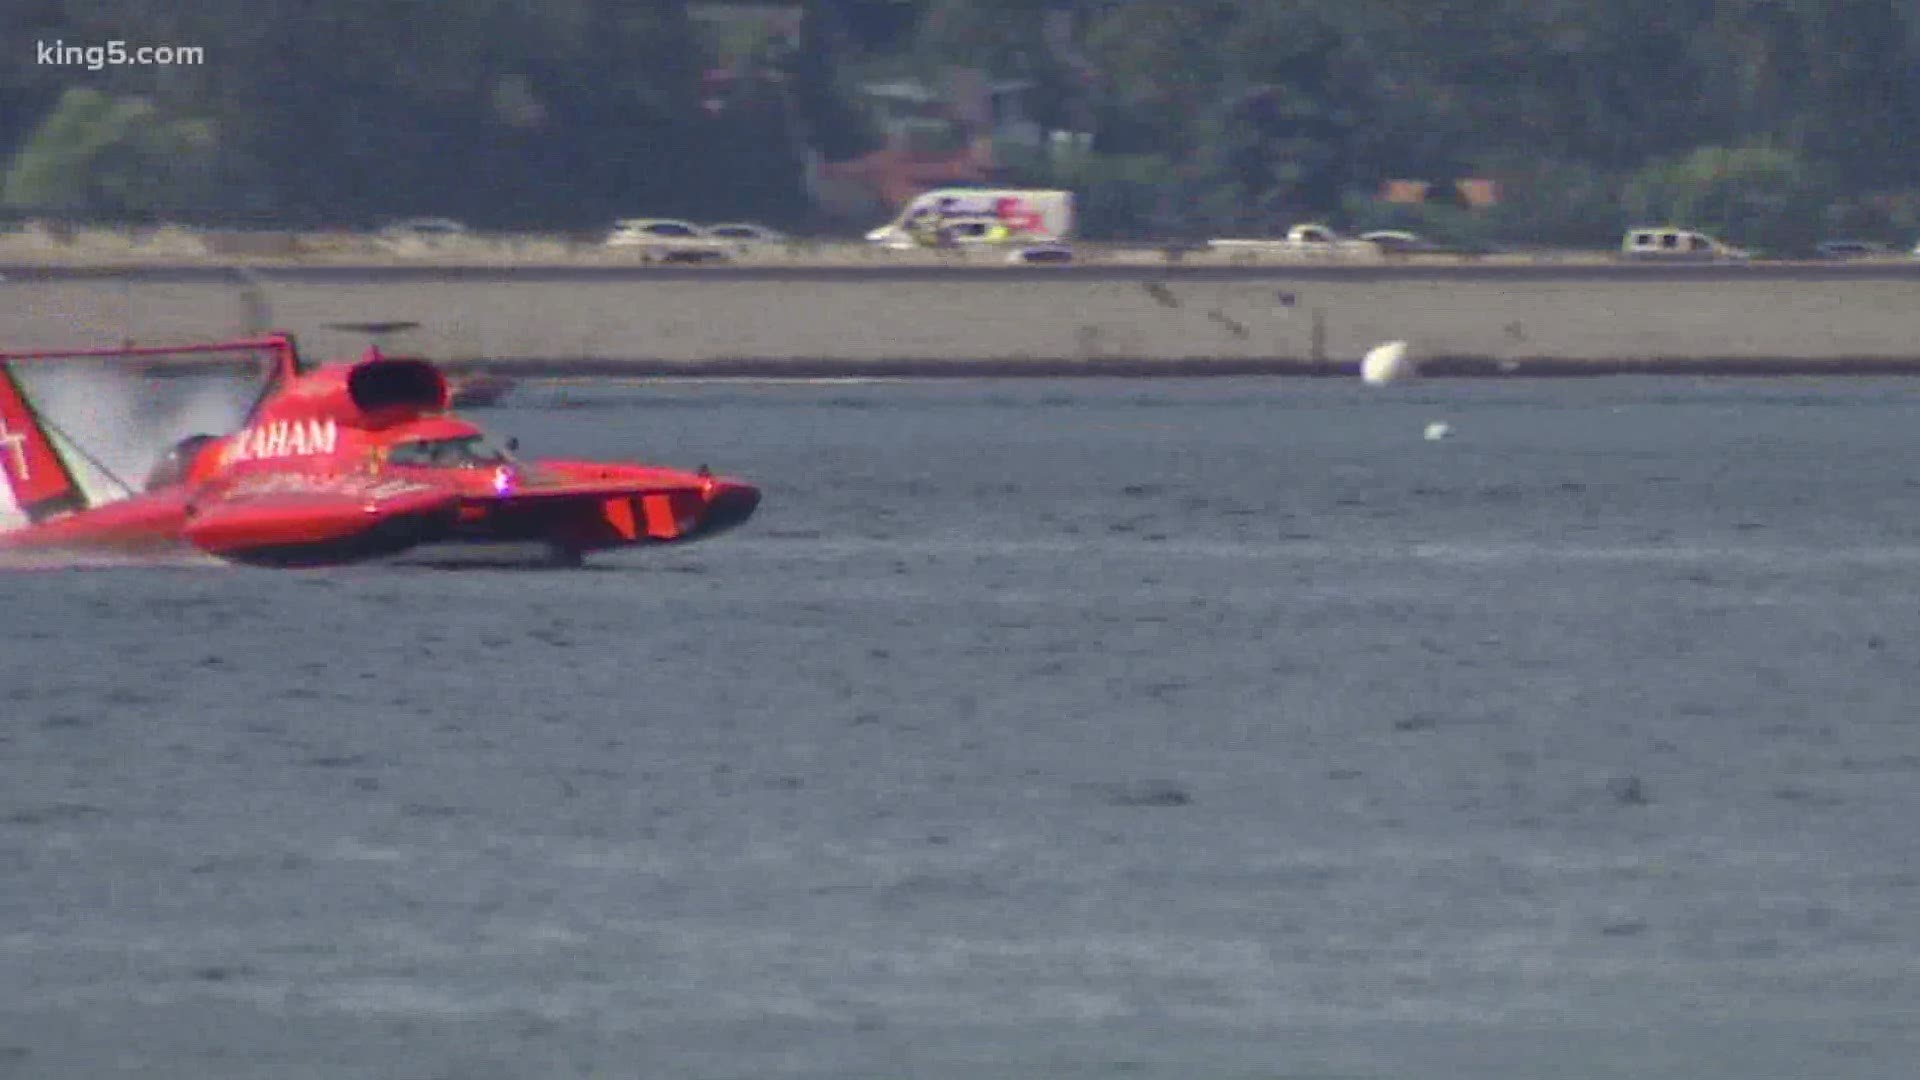 Organizers for the annual Seafair festival say this year's major events like the Fourth of July fireworks and weekend festivals are rescheduled for 2021.